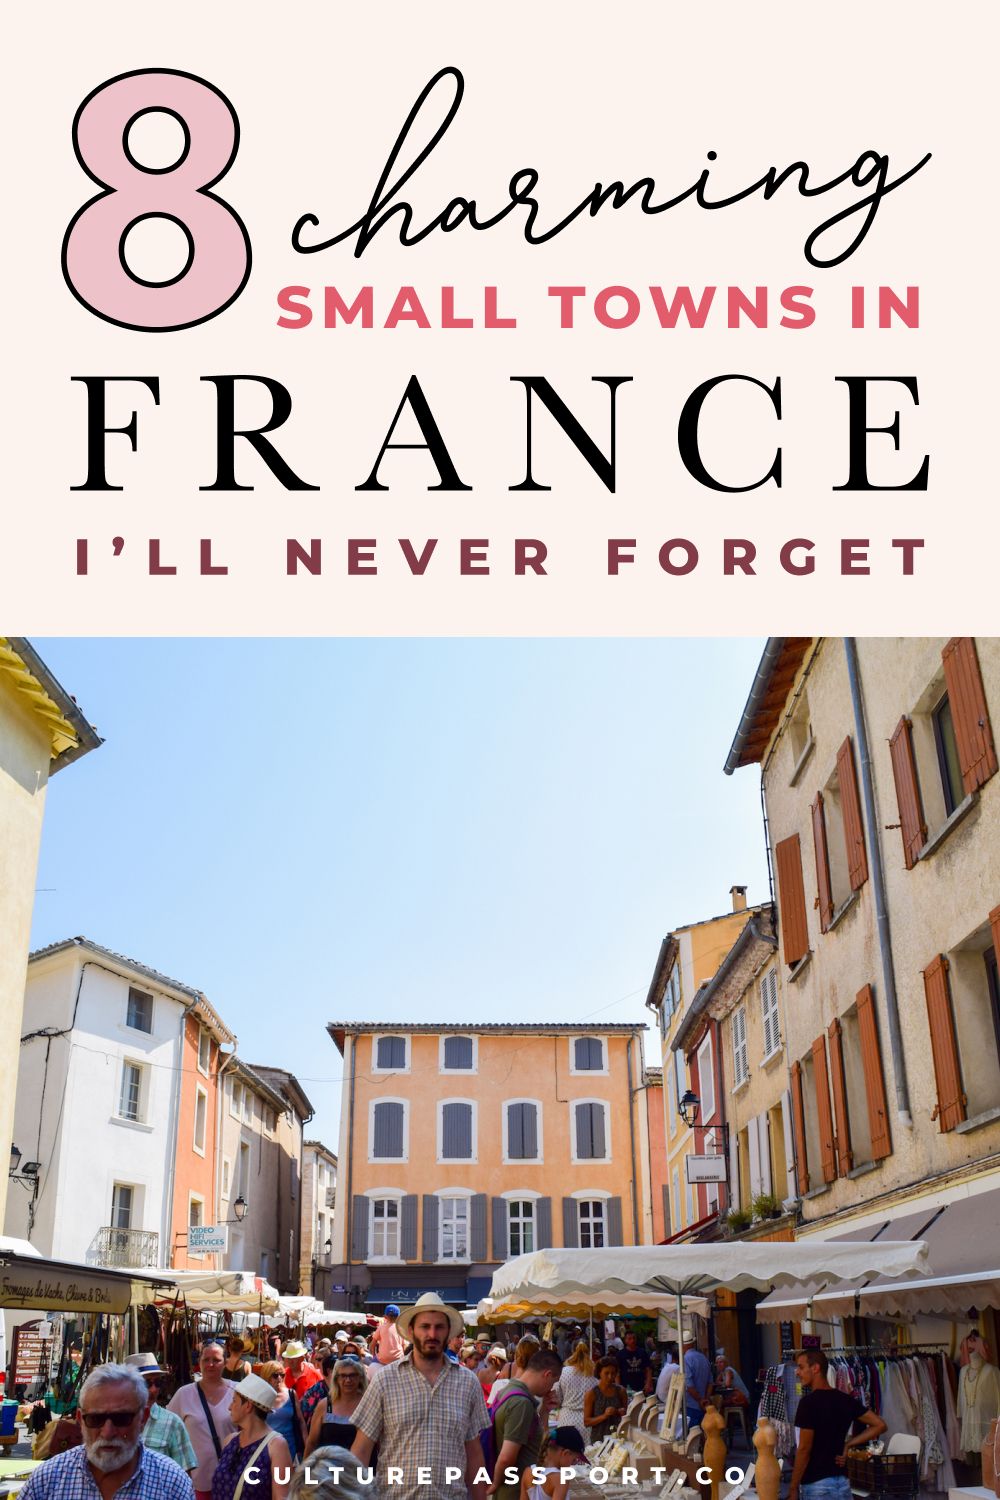 8 Charming Small Towns In France I’ll Never Forget